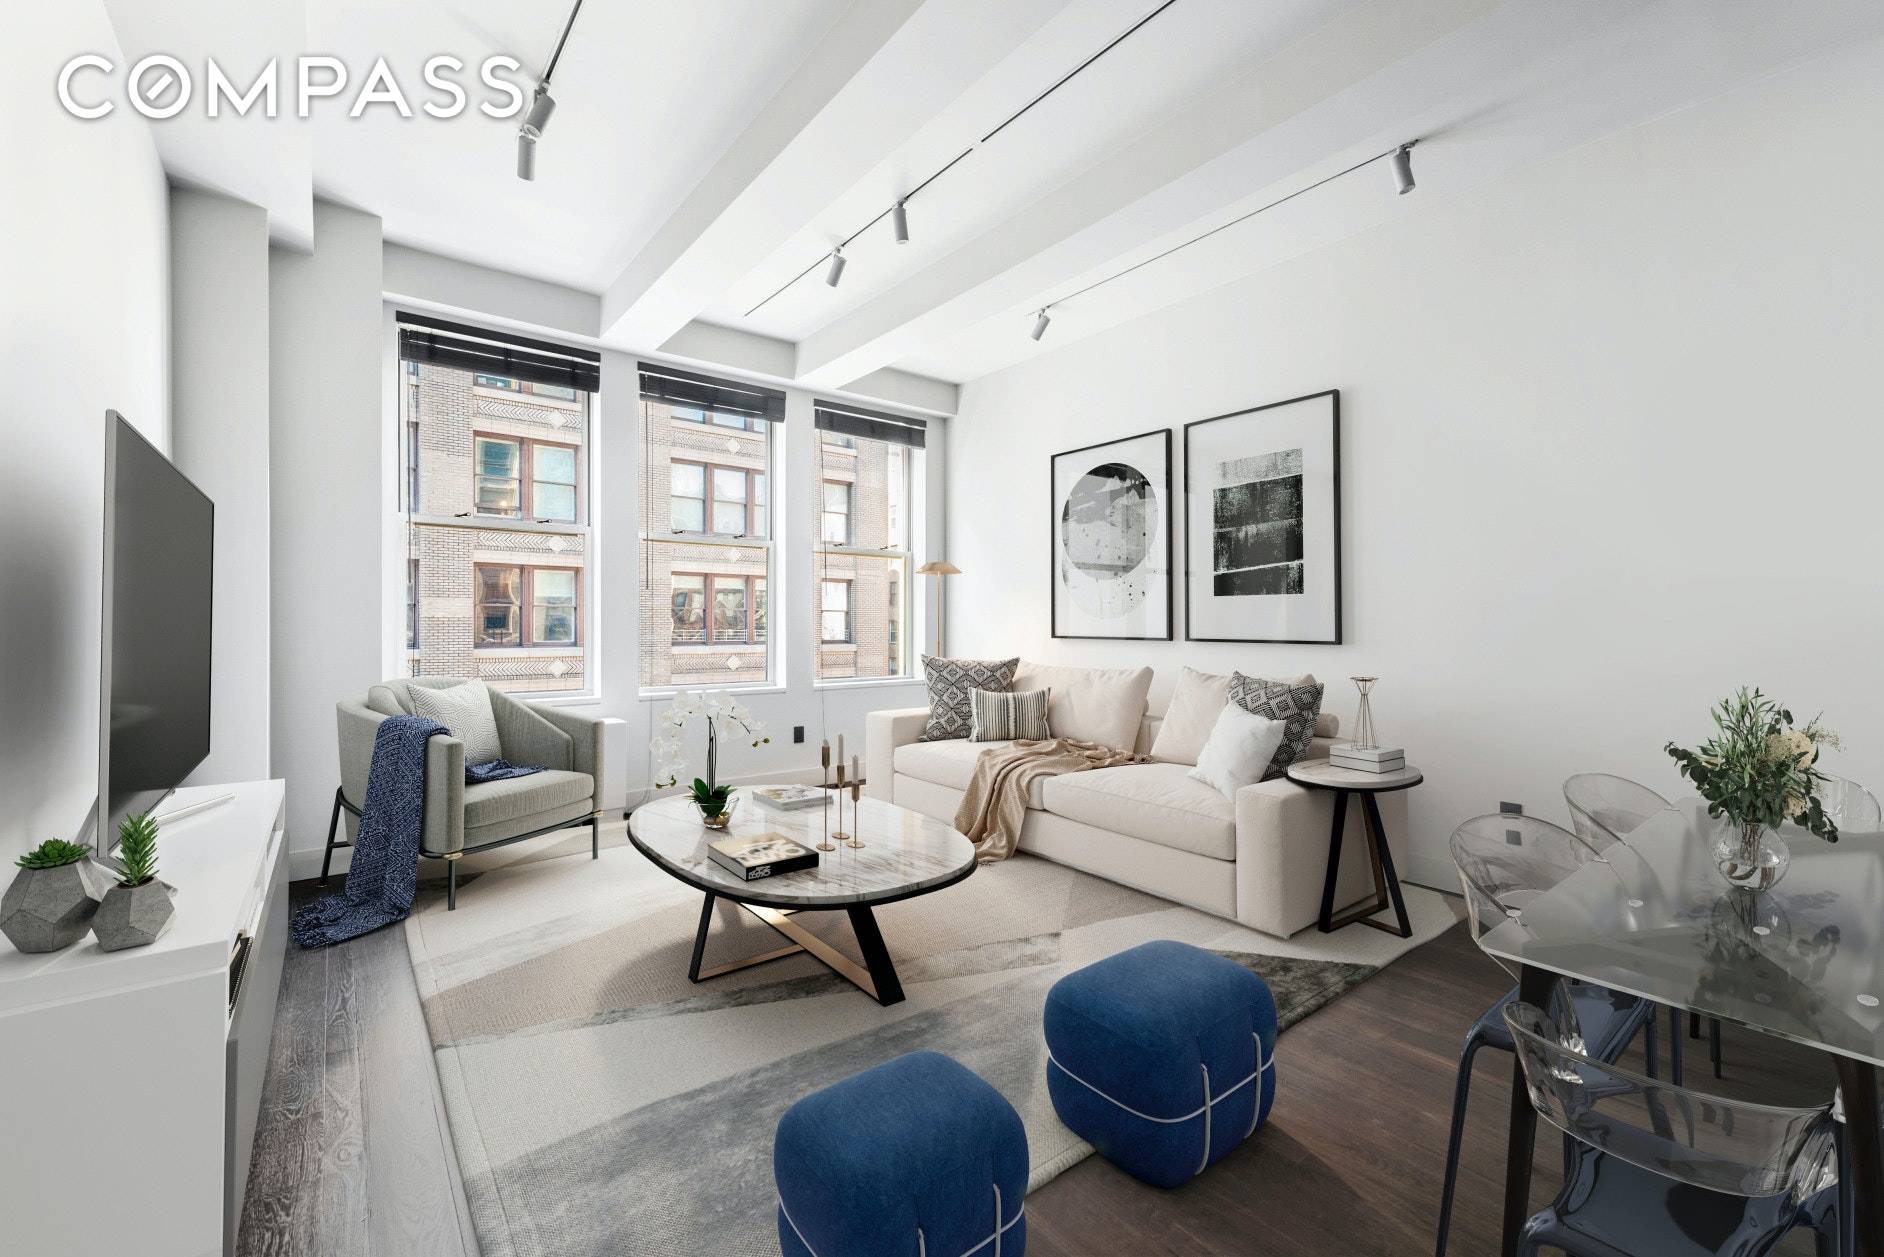 Sophisticated and absolutely stunning 2 bedroom 2 bathroom perfectly positioned on the perimeter of Flatiron and Gramercy.